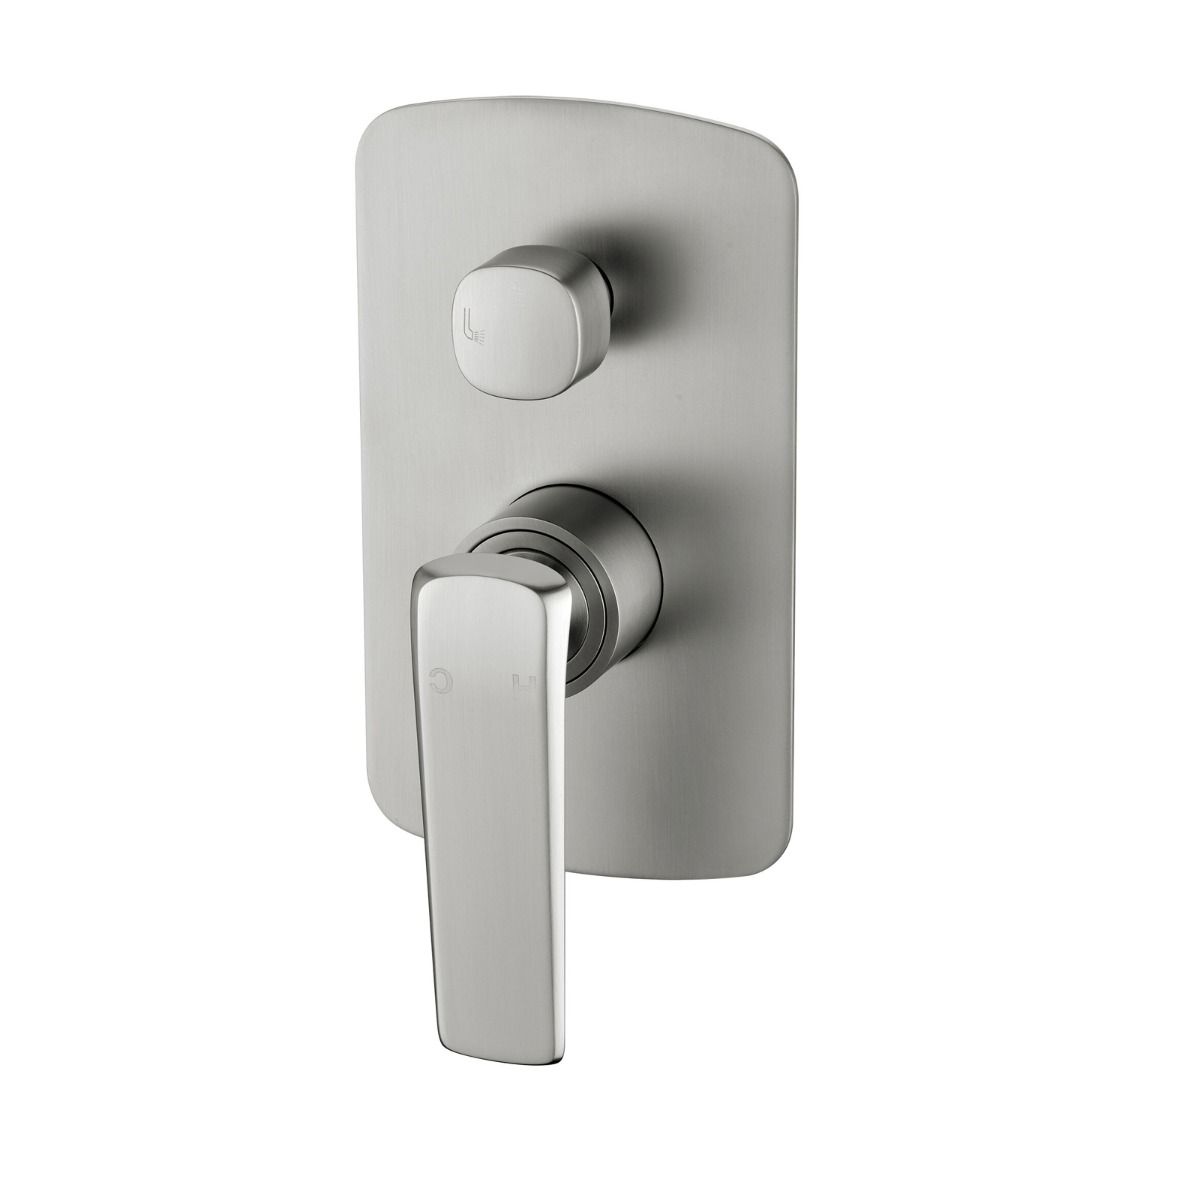 NORICO ESPERIA WALL MIXER WITH DIVERTER BRUSHED NICKEL